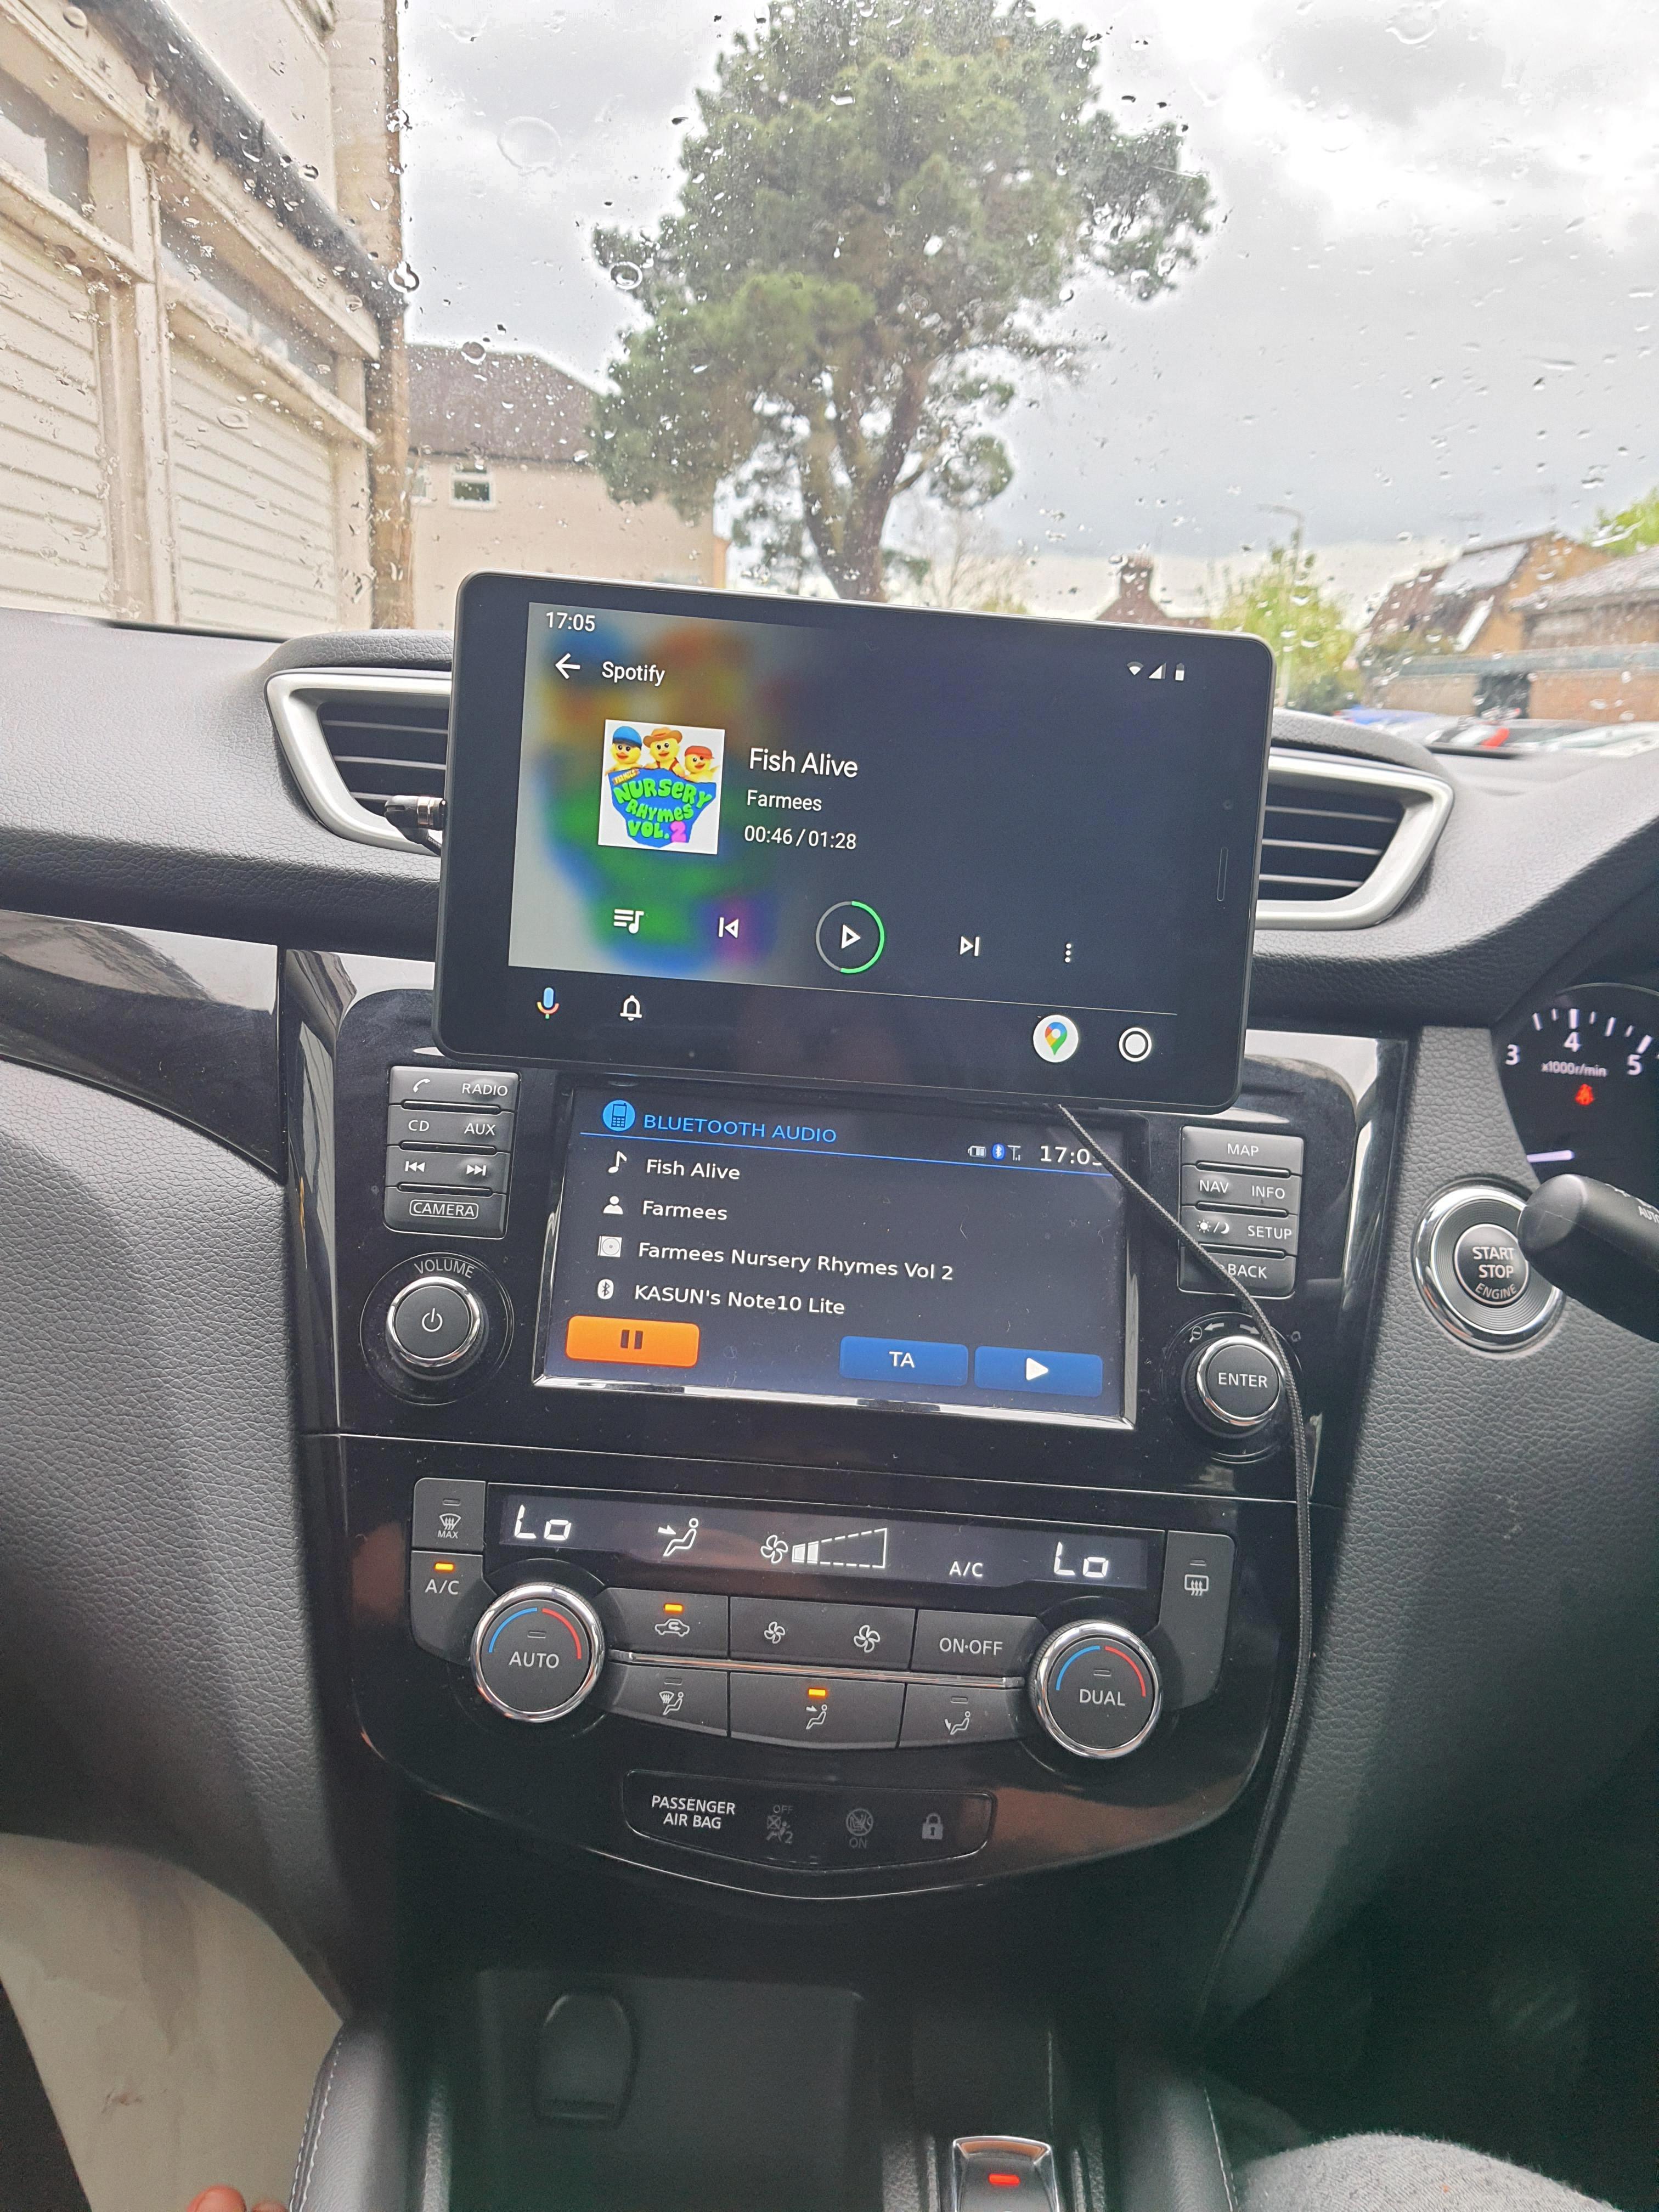 How to Transform Your Tablet into an Android Auto Device? 7